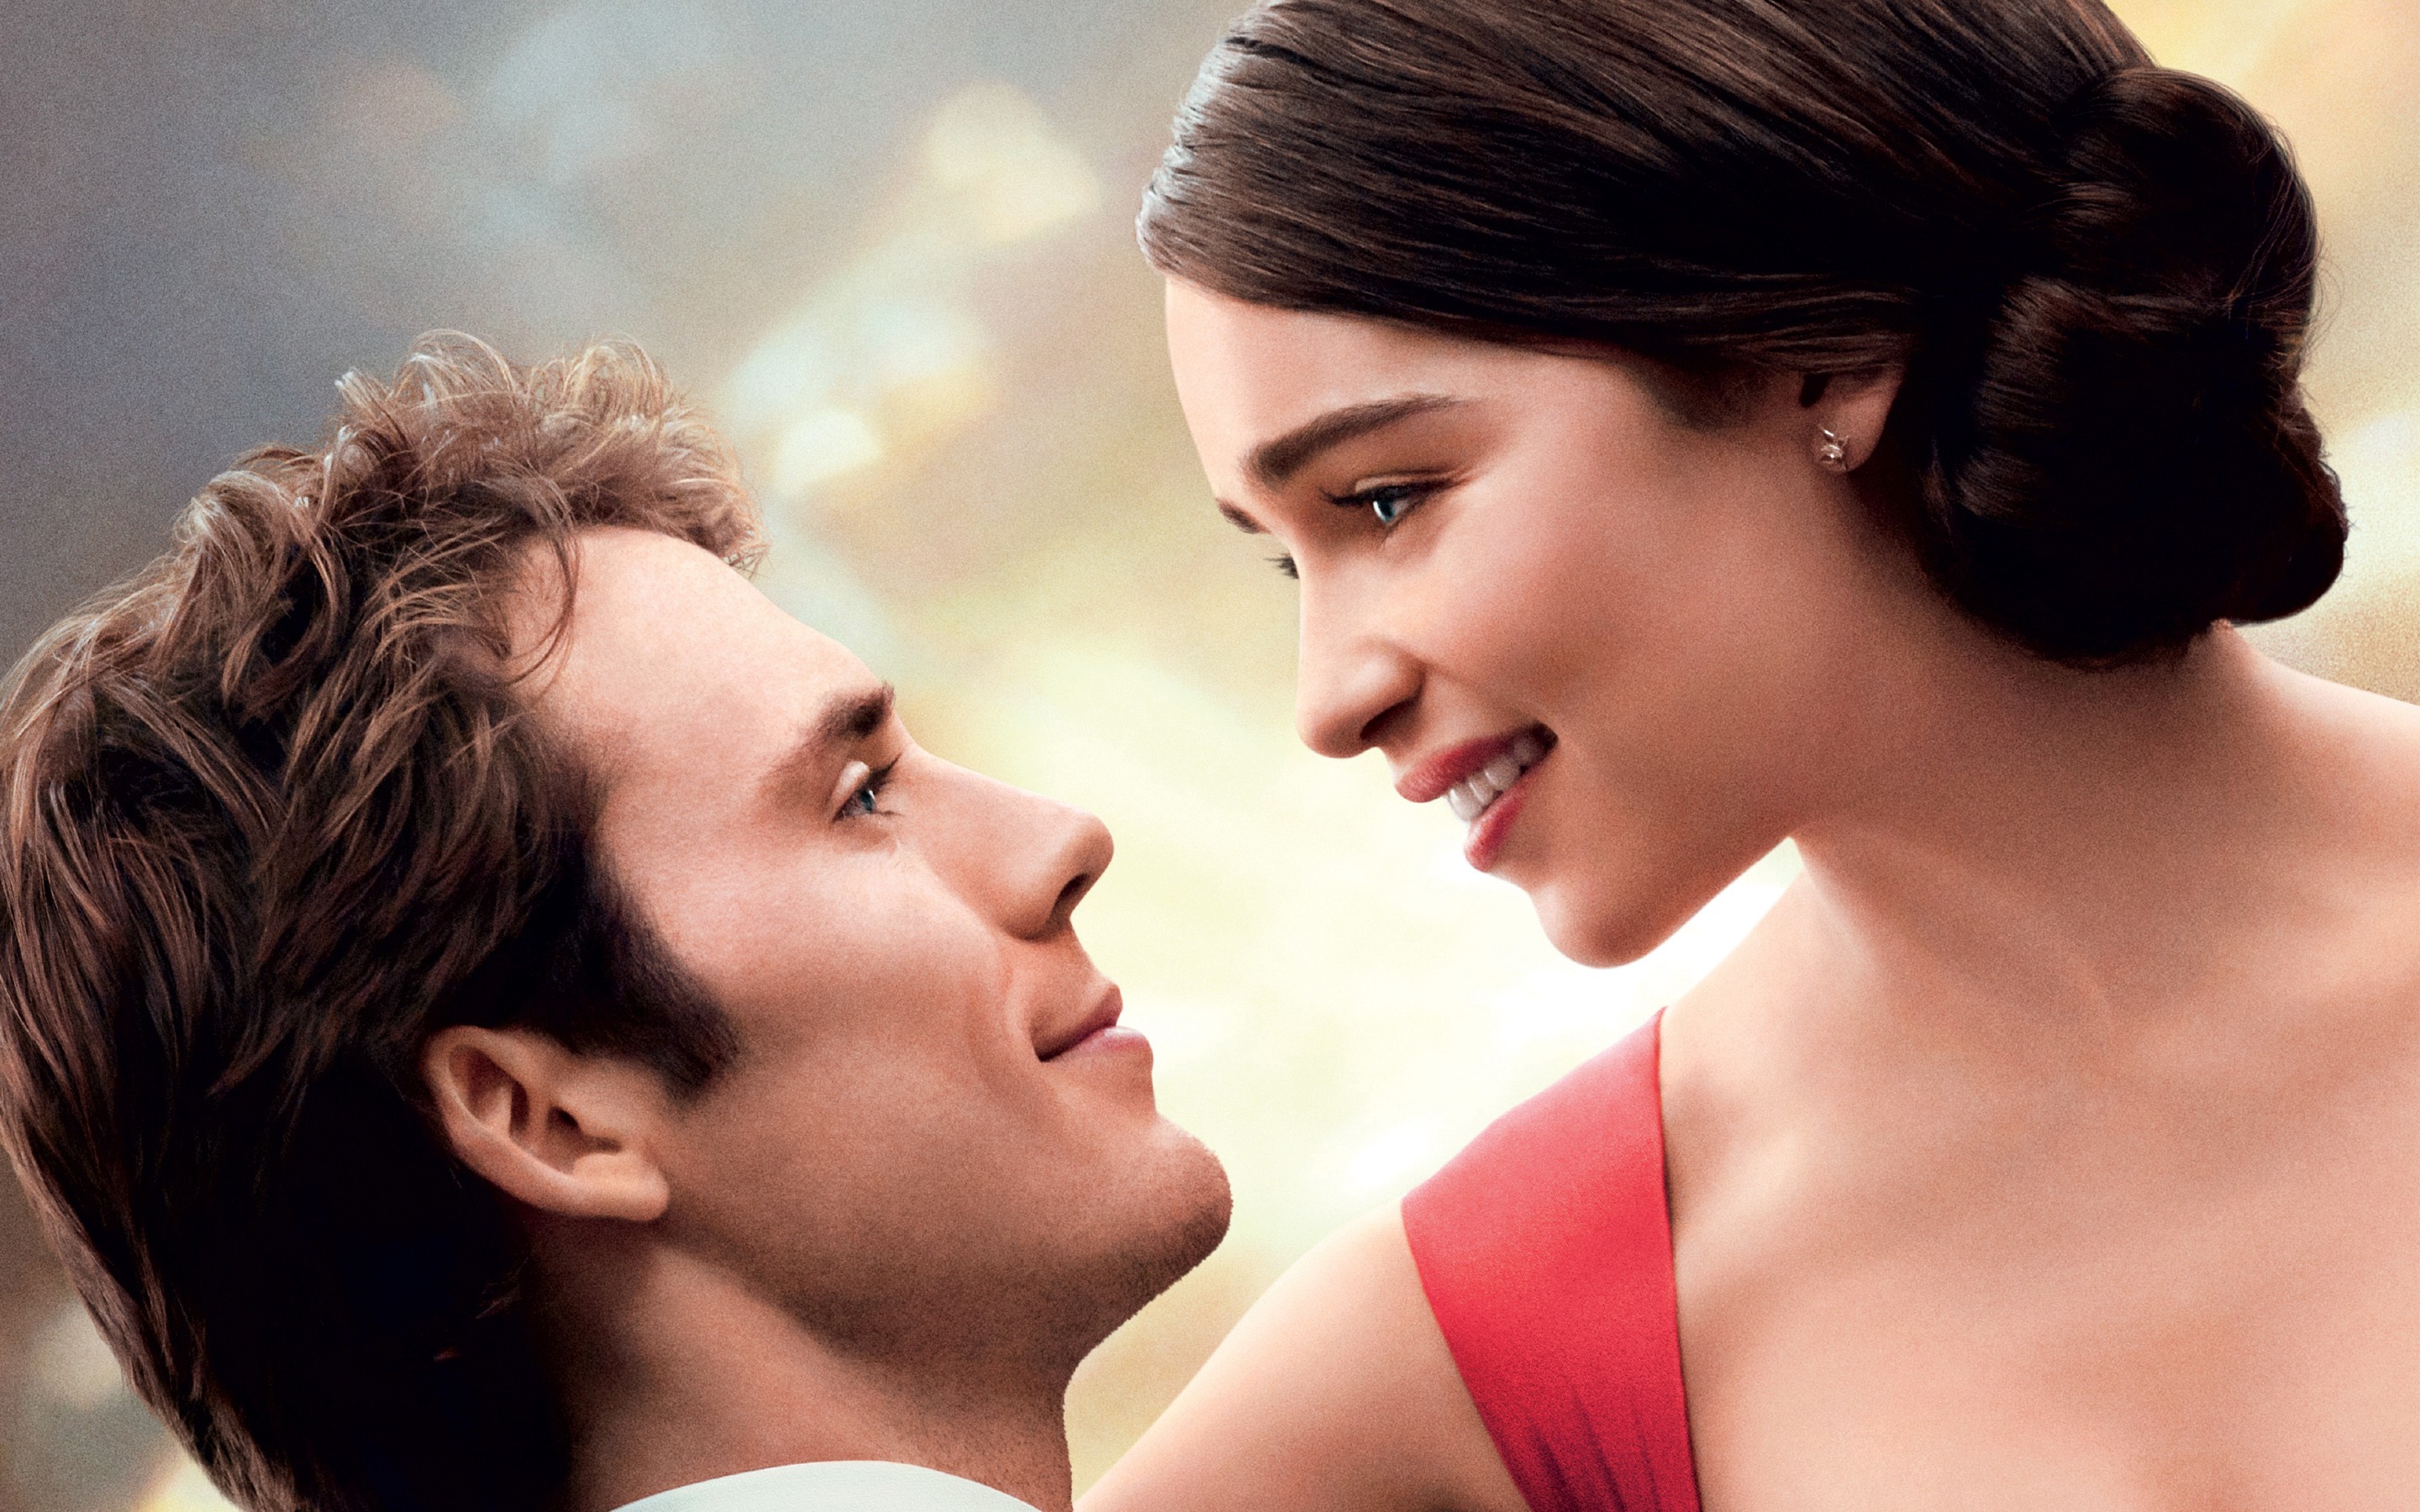 Me Before You Movie - Ed Sheeran Photograph Me Before You , HD Wallpaper & Backgrounds